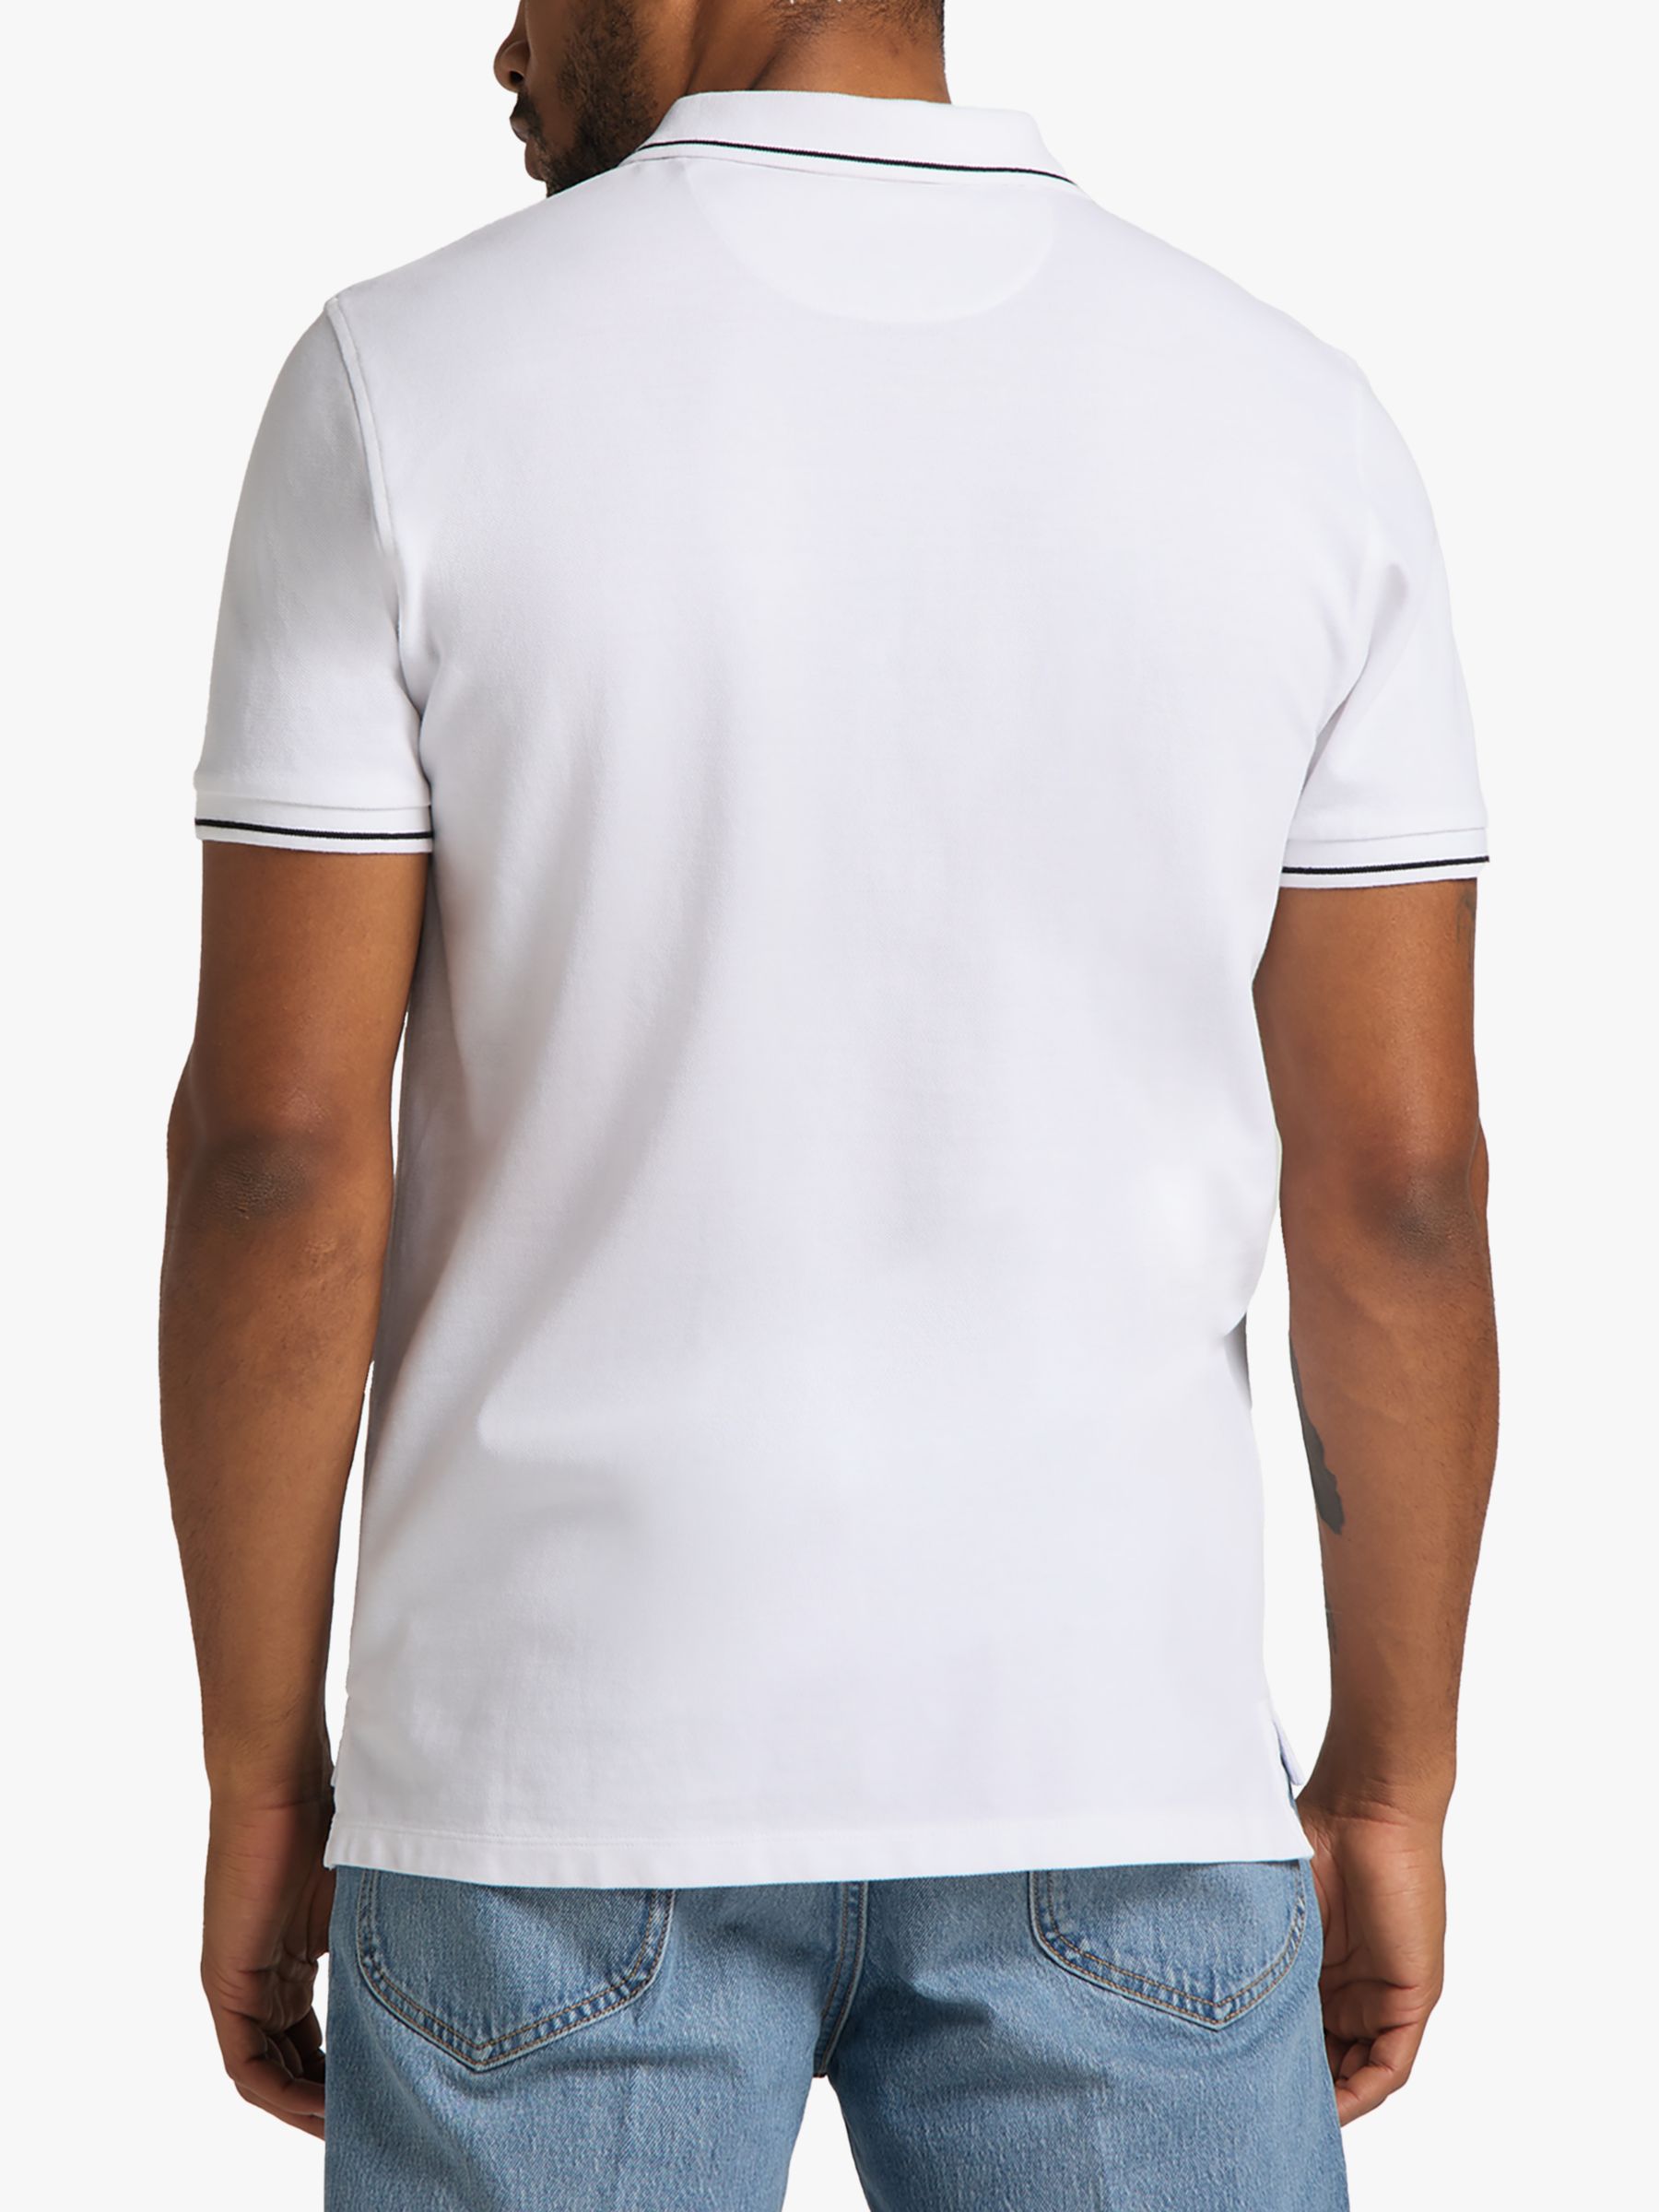 Lee Short Sleeve Polo Top, Bright White at John Lewis & Partners